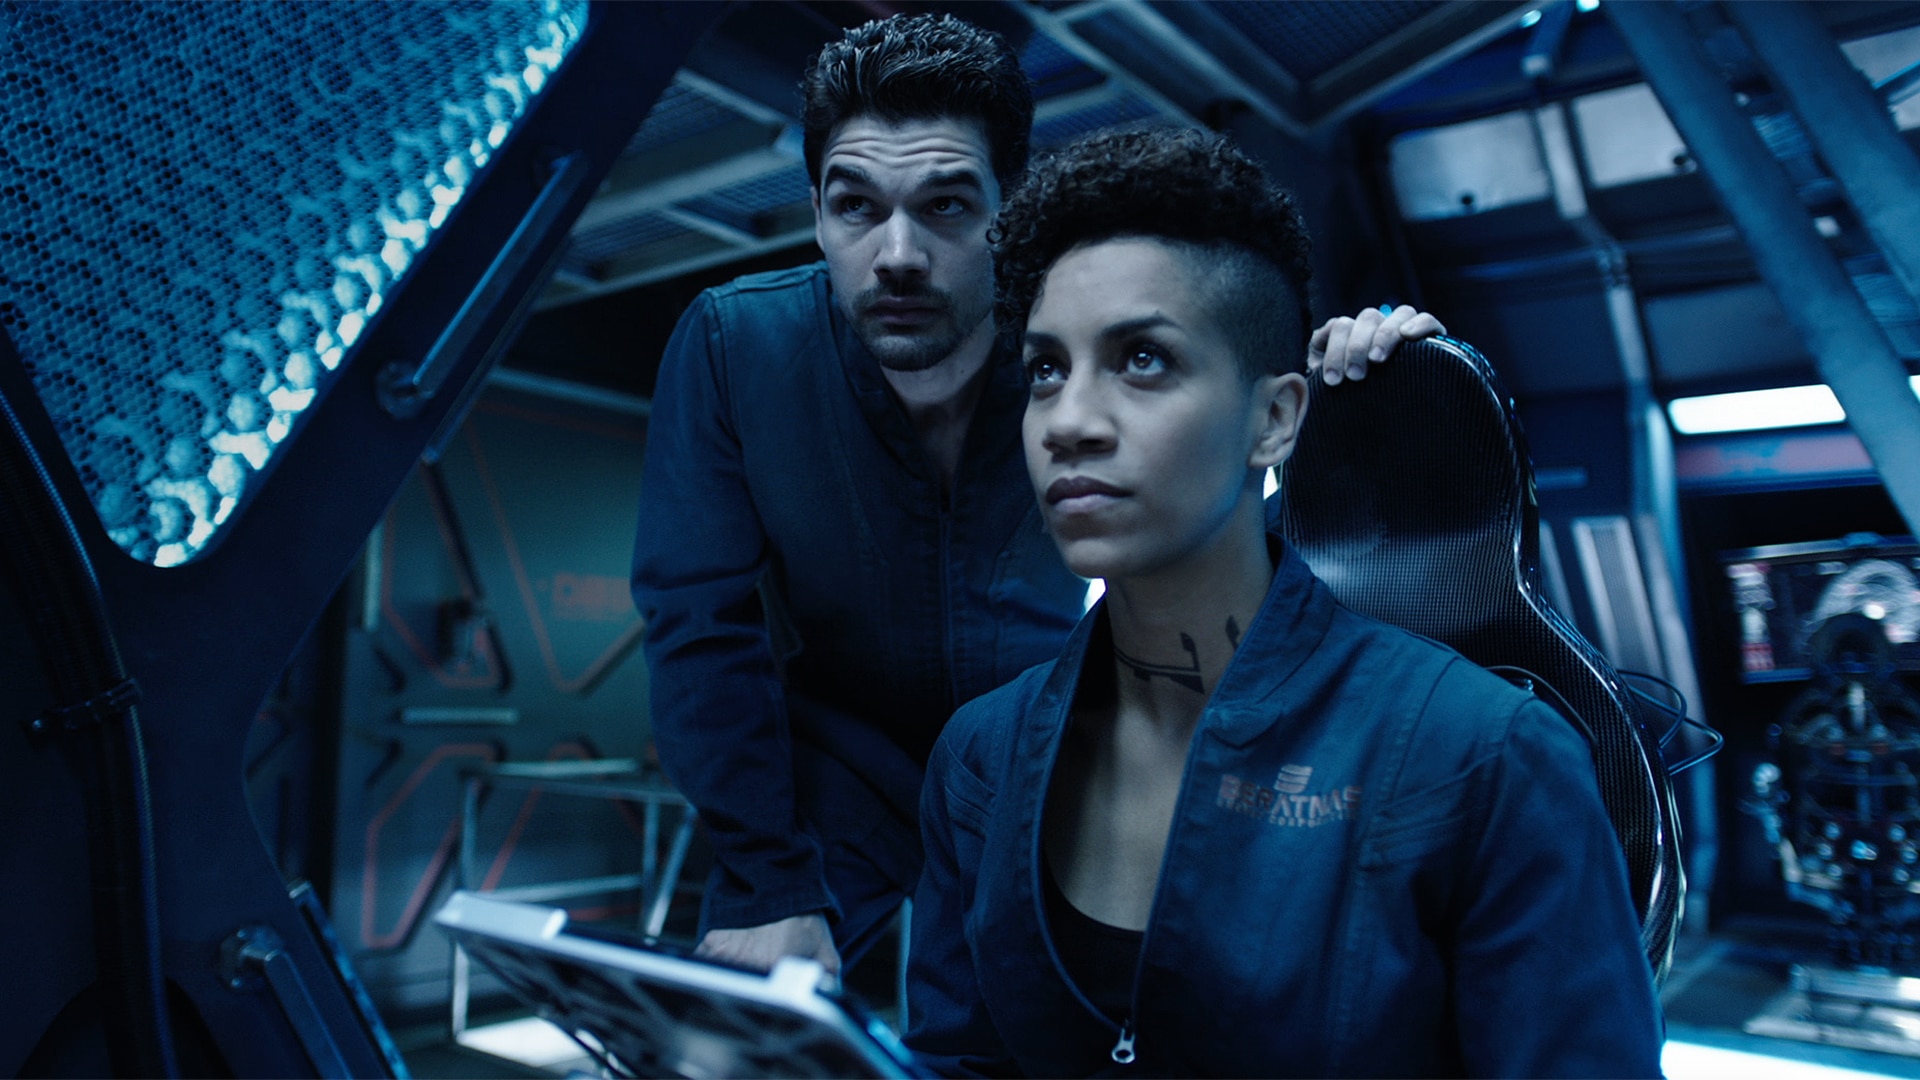 The Expanse' Season 6 Review - A Perfect Send-off